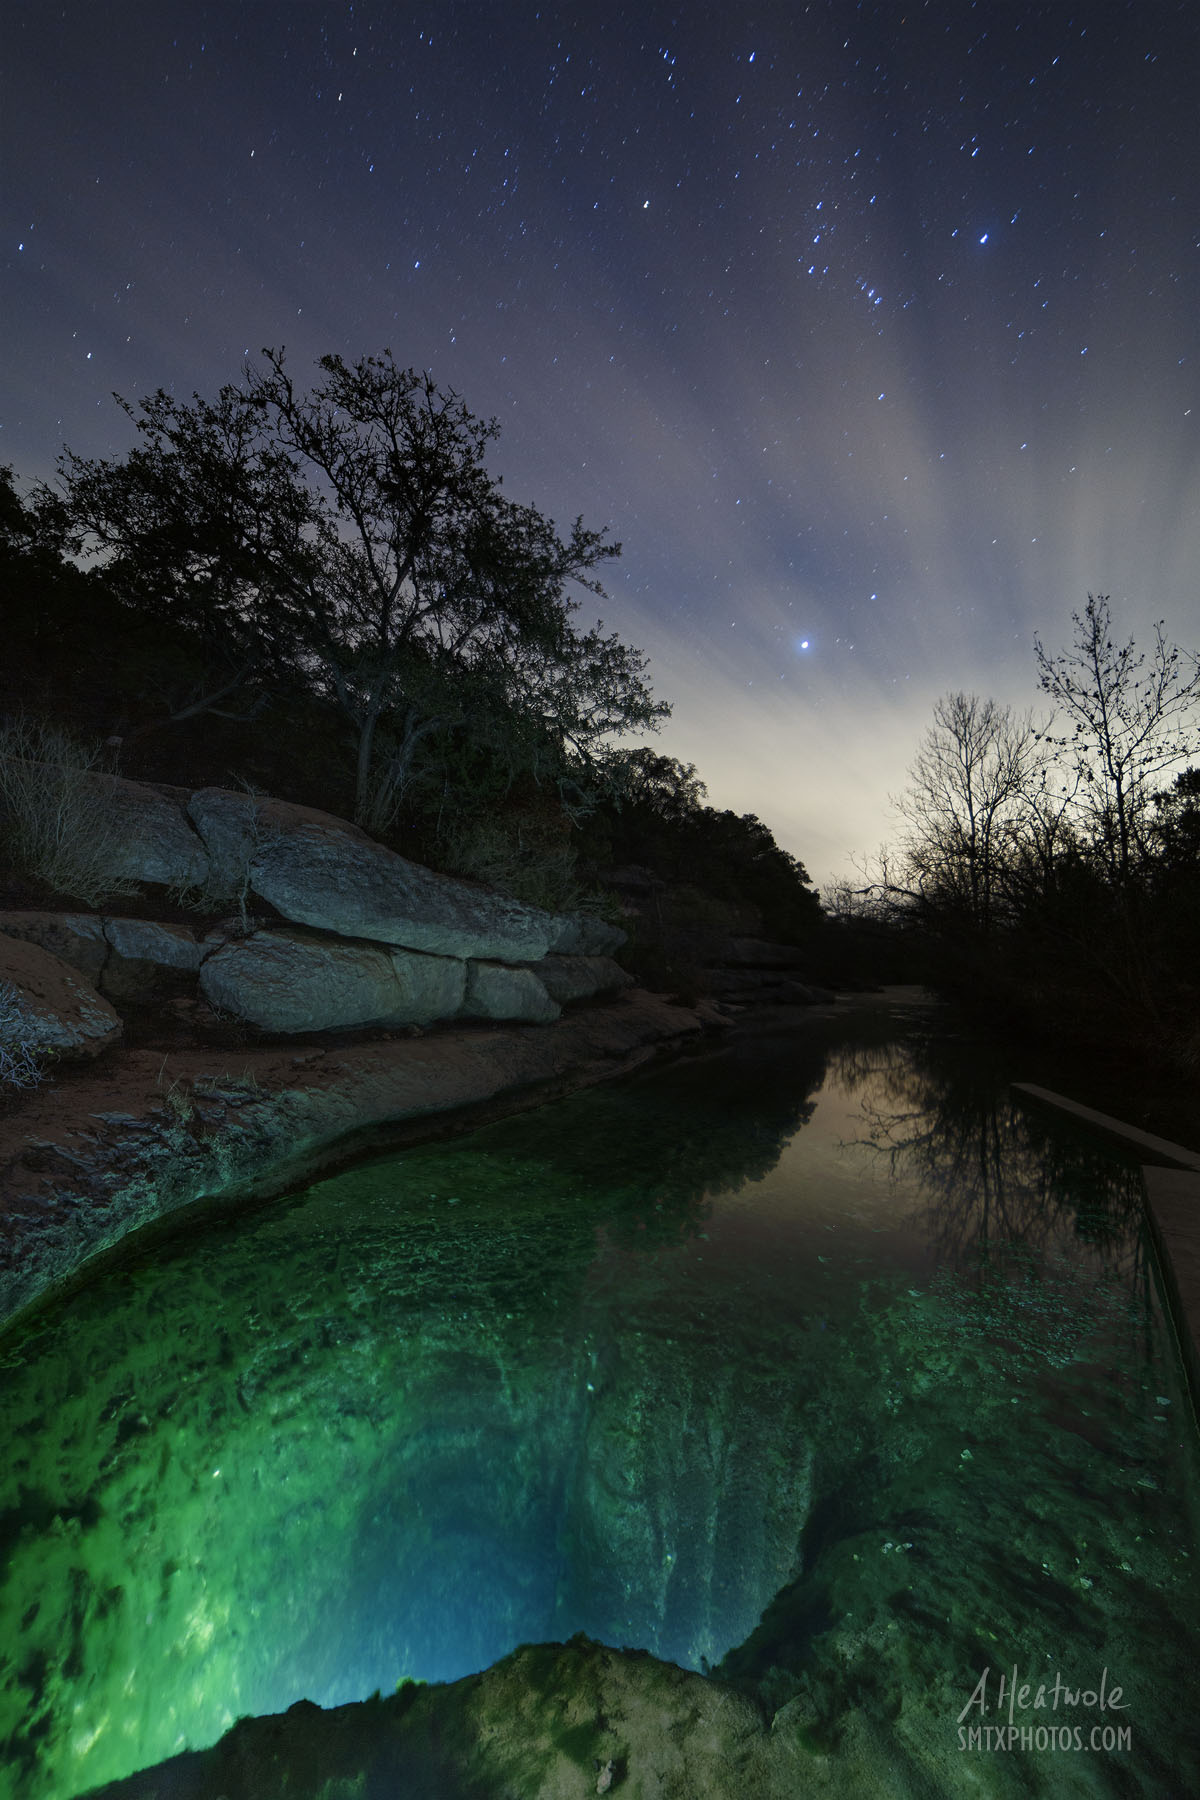 Jacob's Well in Wimberley, TX at night with clouds and stars.